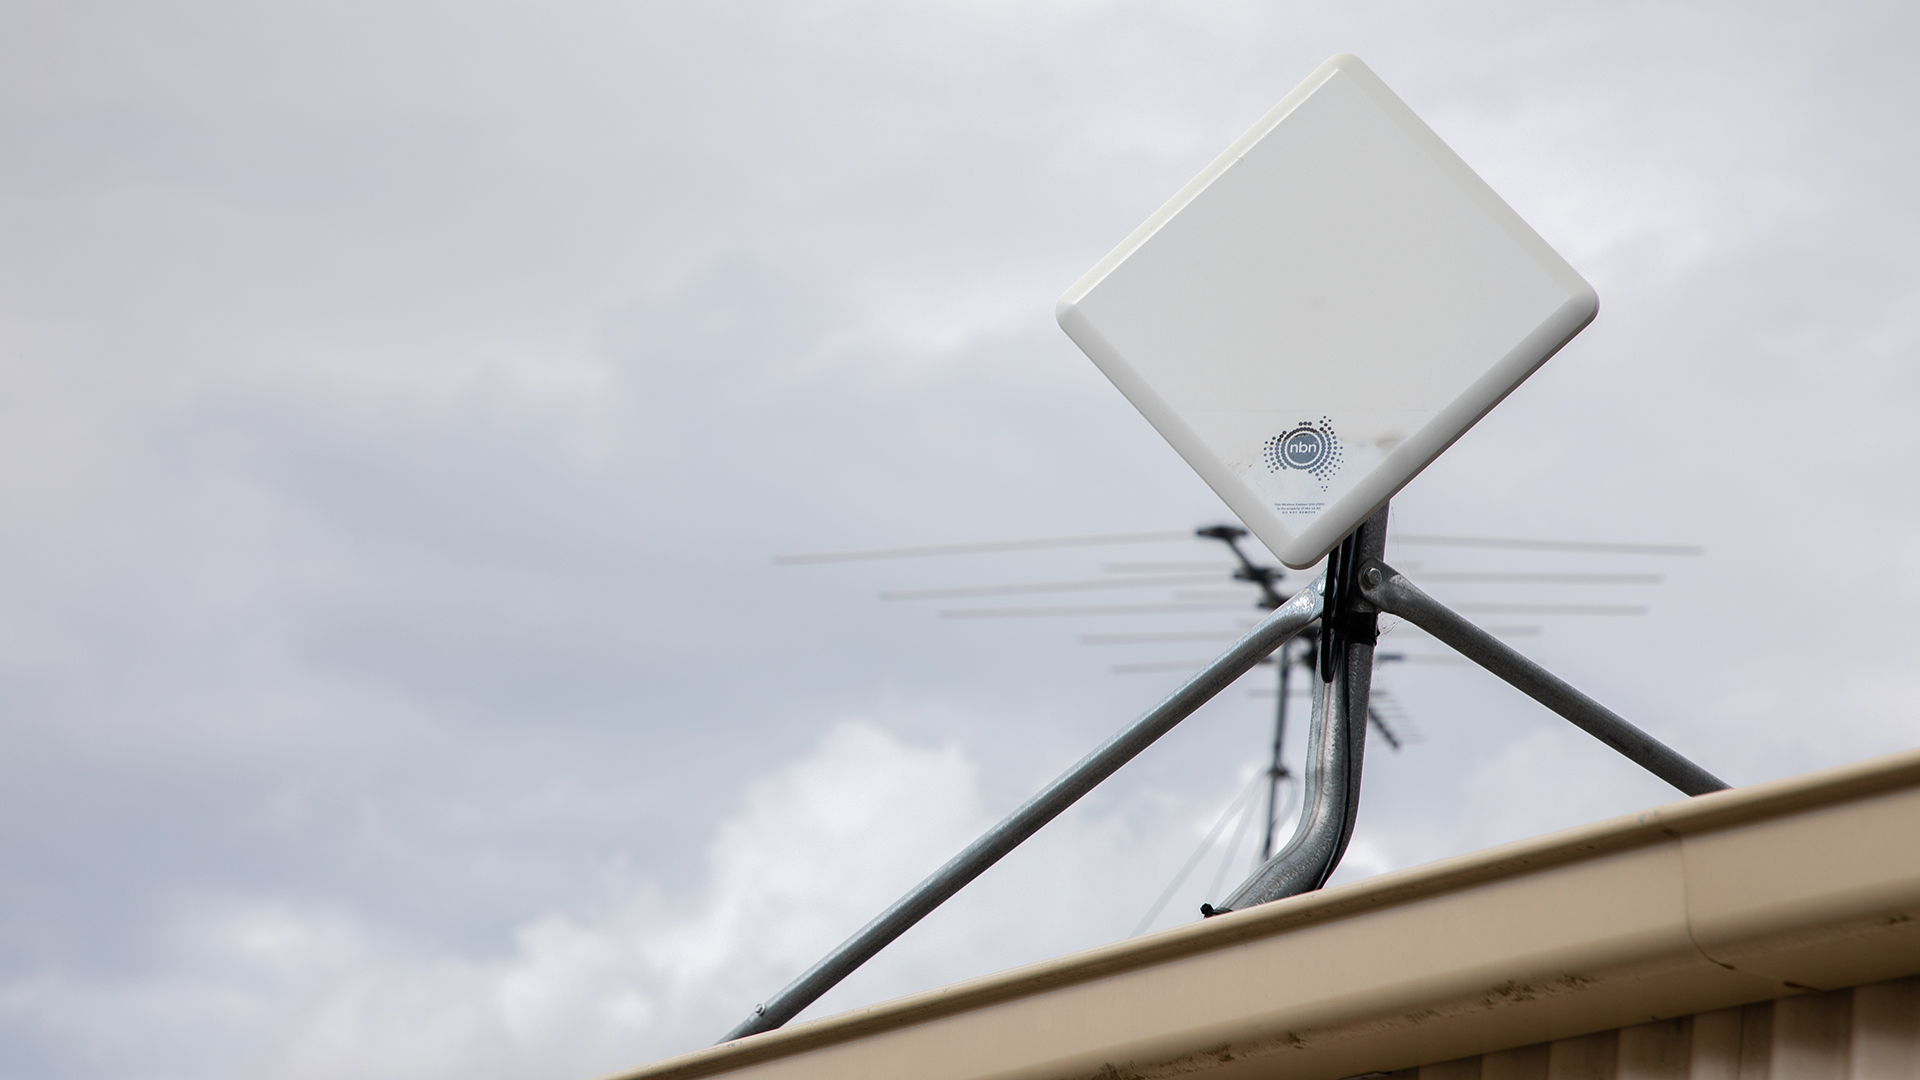 NBN fixed wireless internet equipment installed on a residential roof.